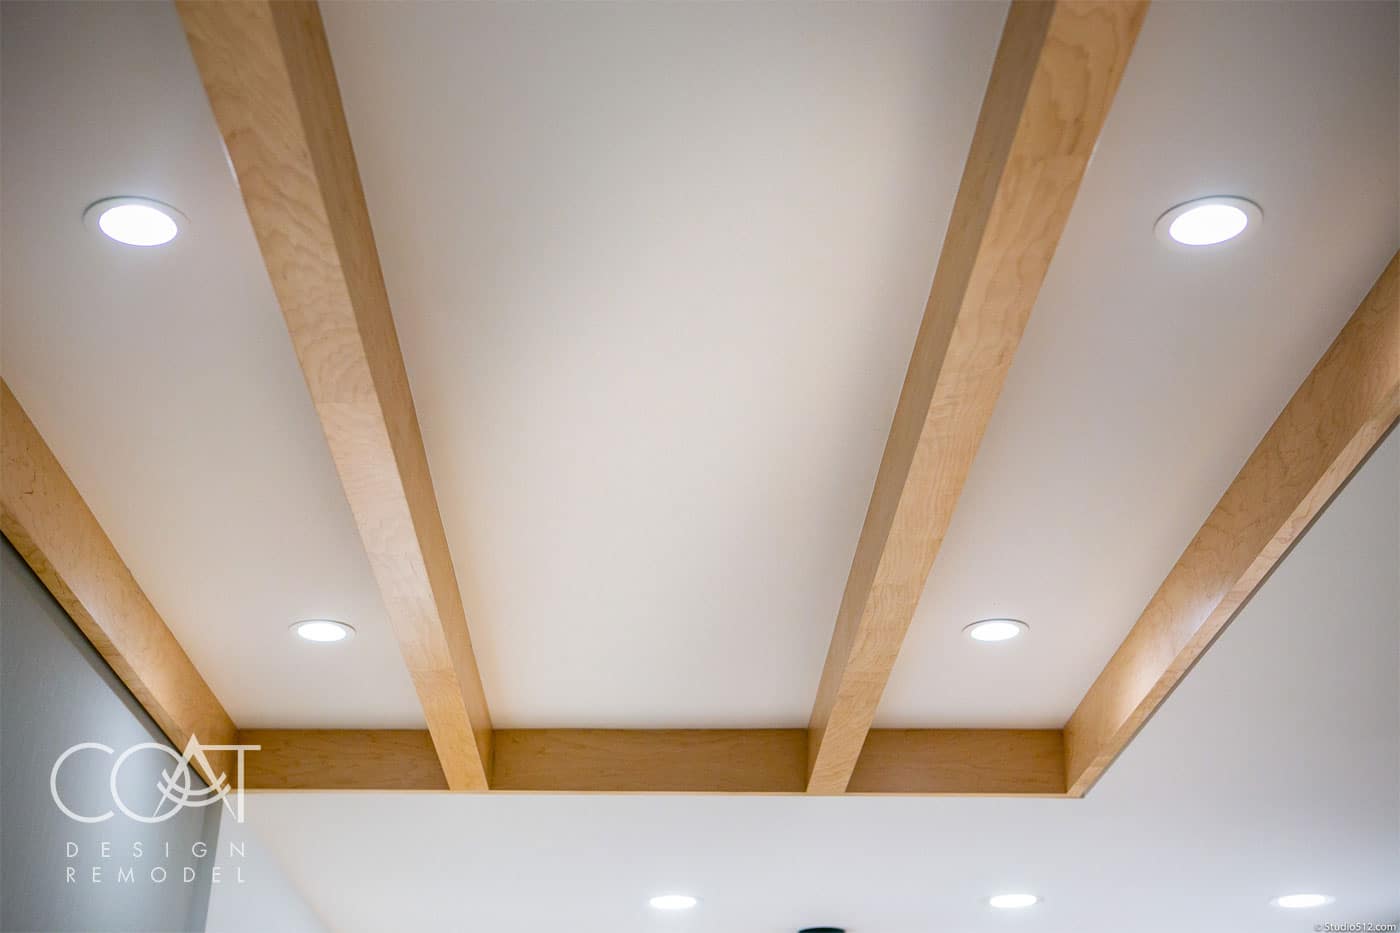 COAT Design Remodel - Recessed ceiling with wooden beams and valances